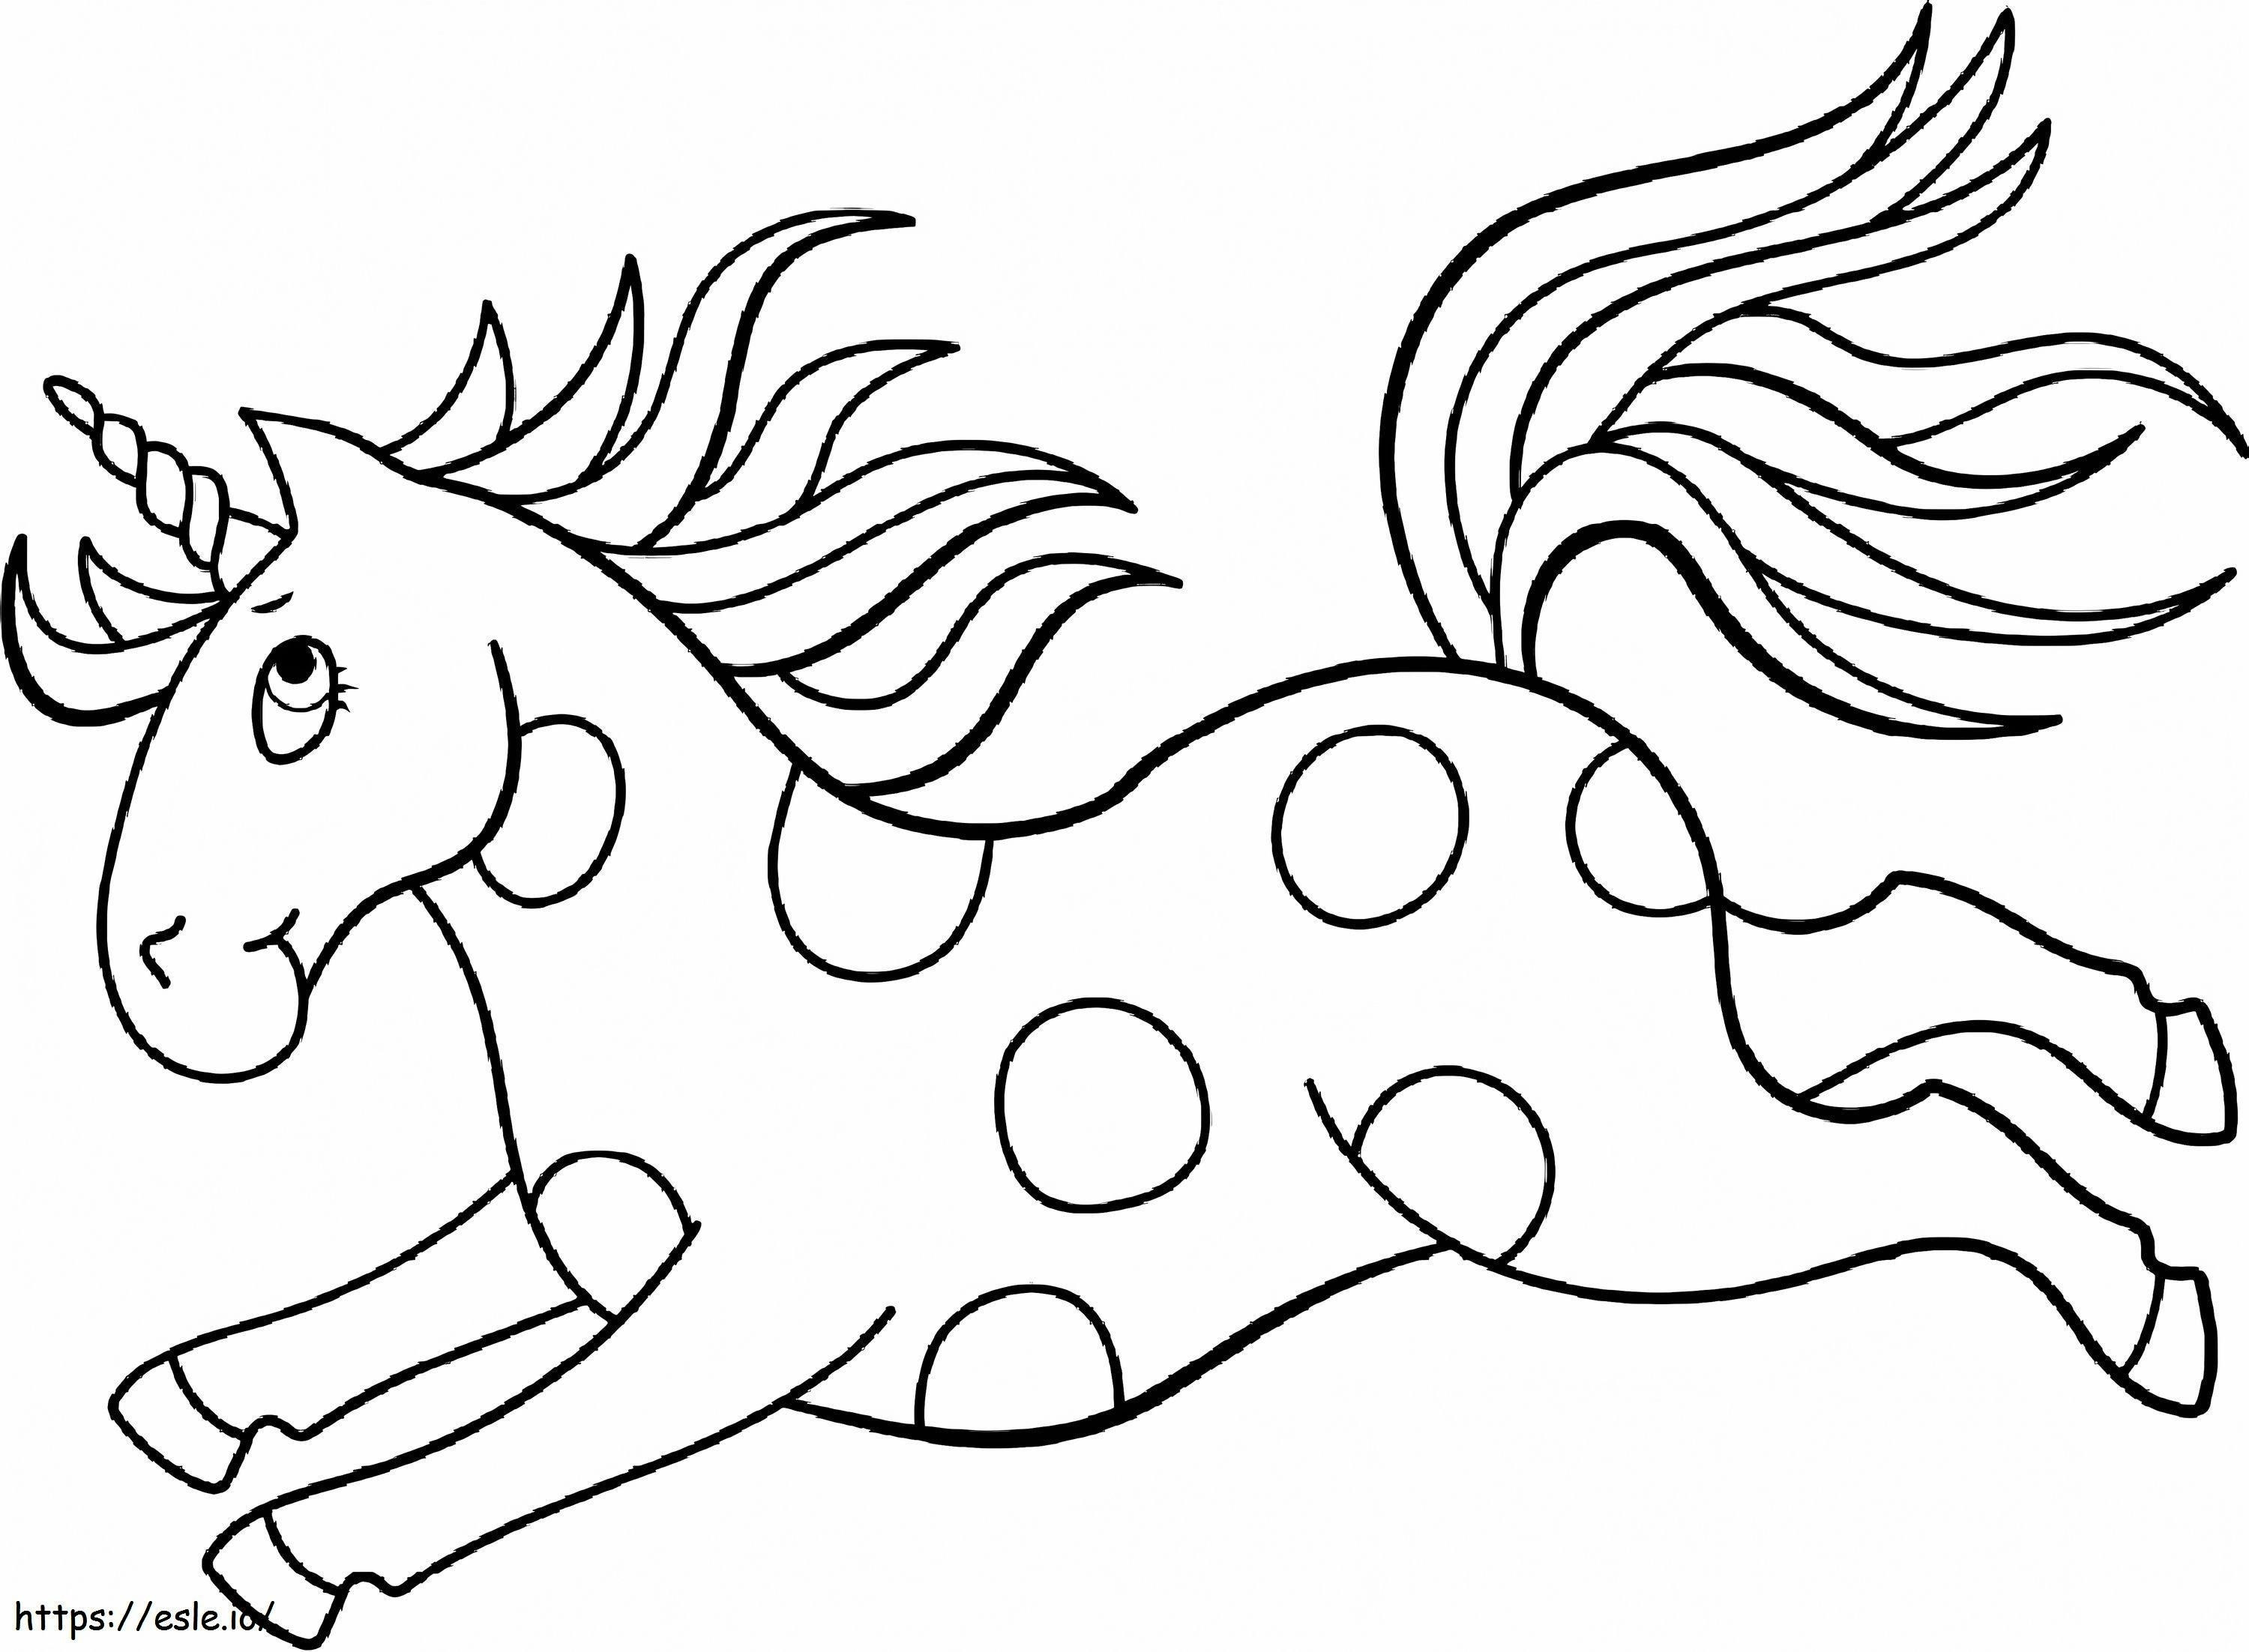 Spotted Unicorn Running coloring page